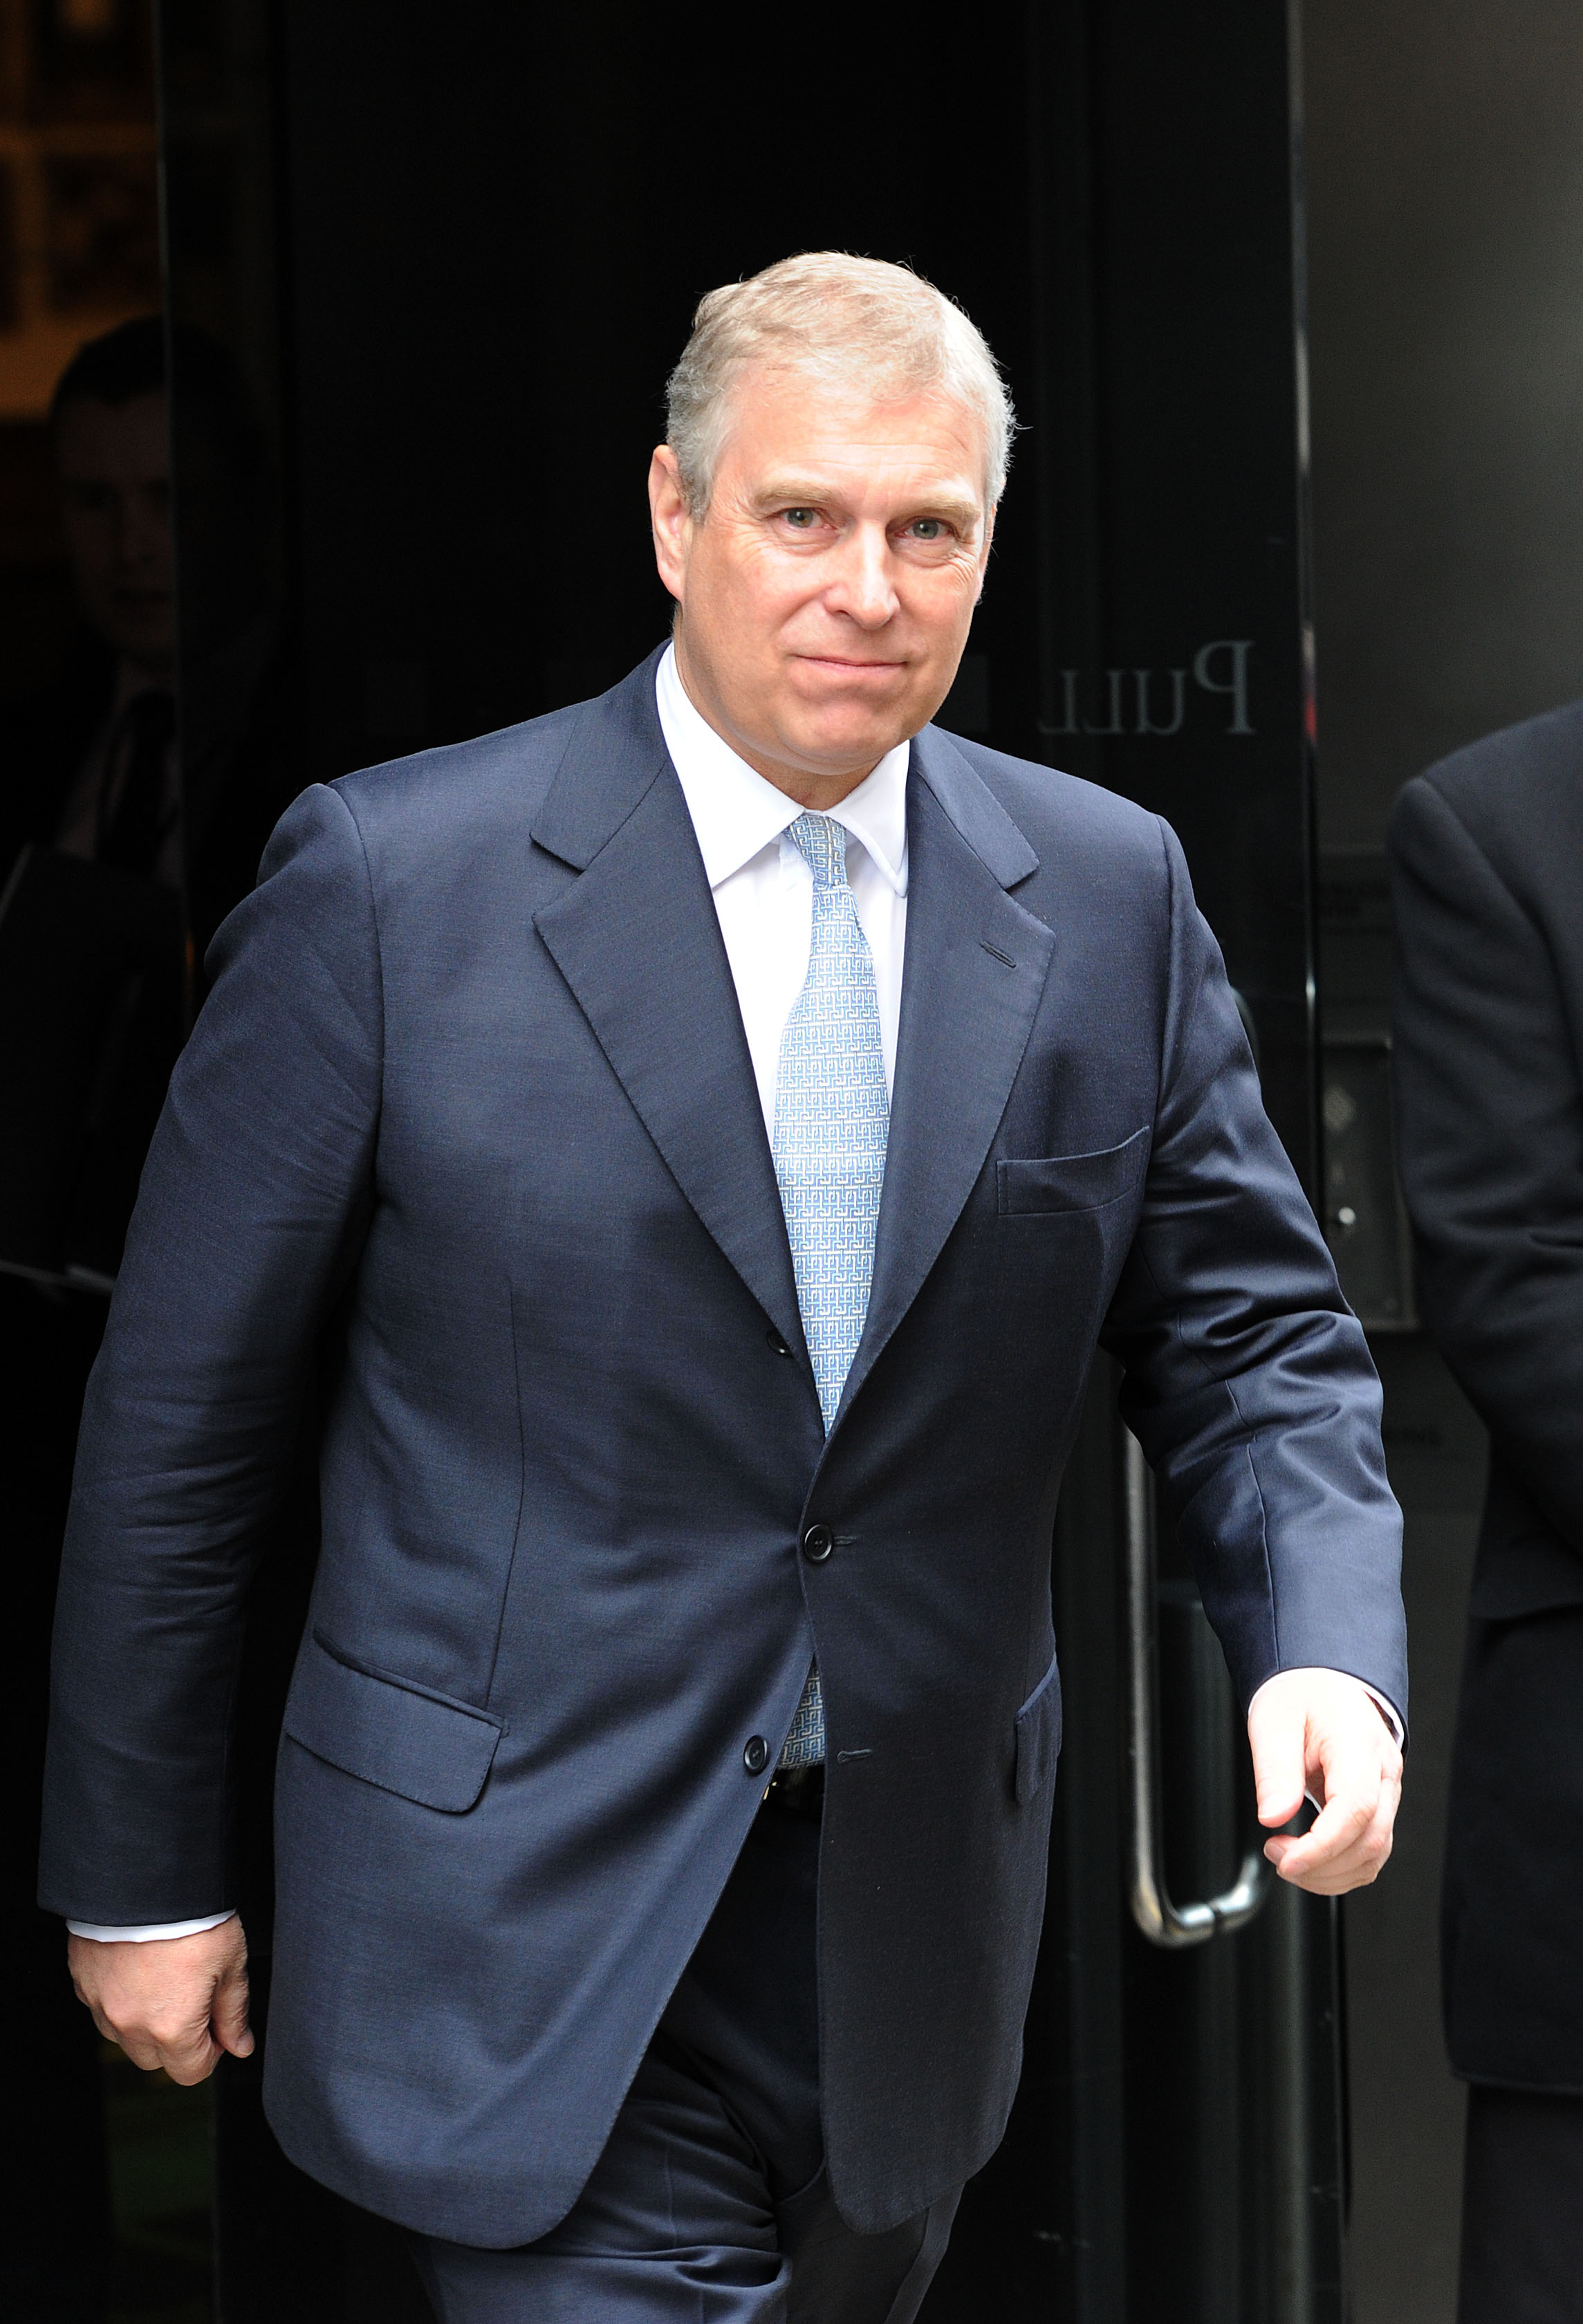 Prince Andrew slightly smiling after visiting Mother London